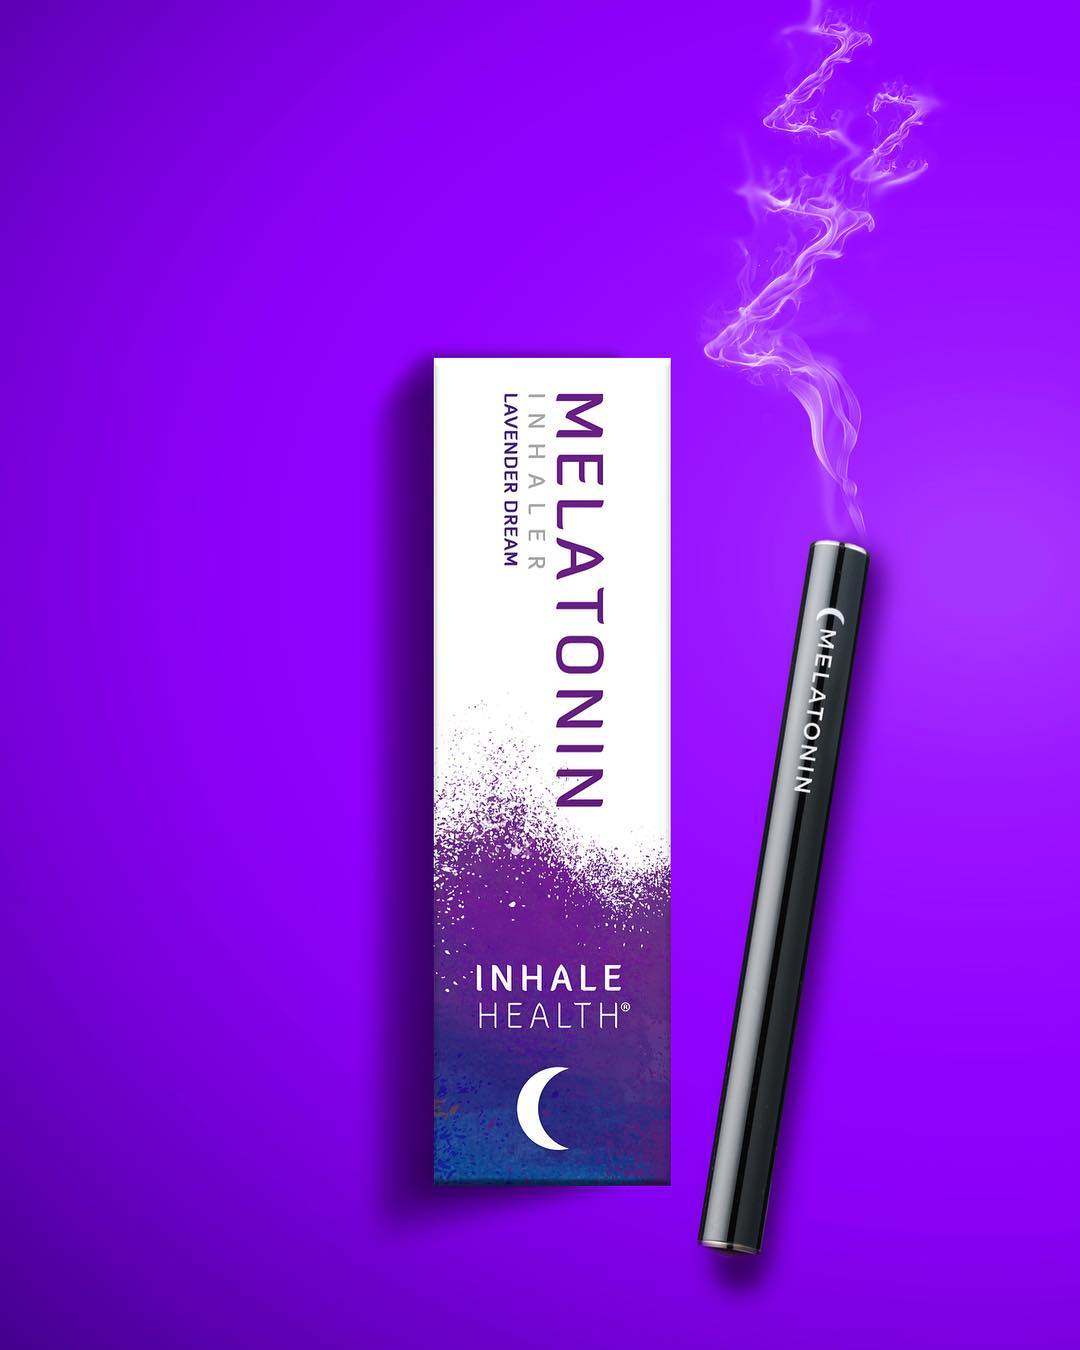 Inhale Health Review - Is It Safe